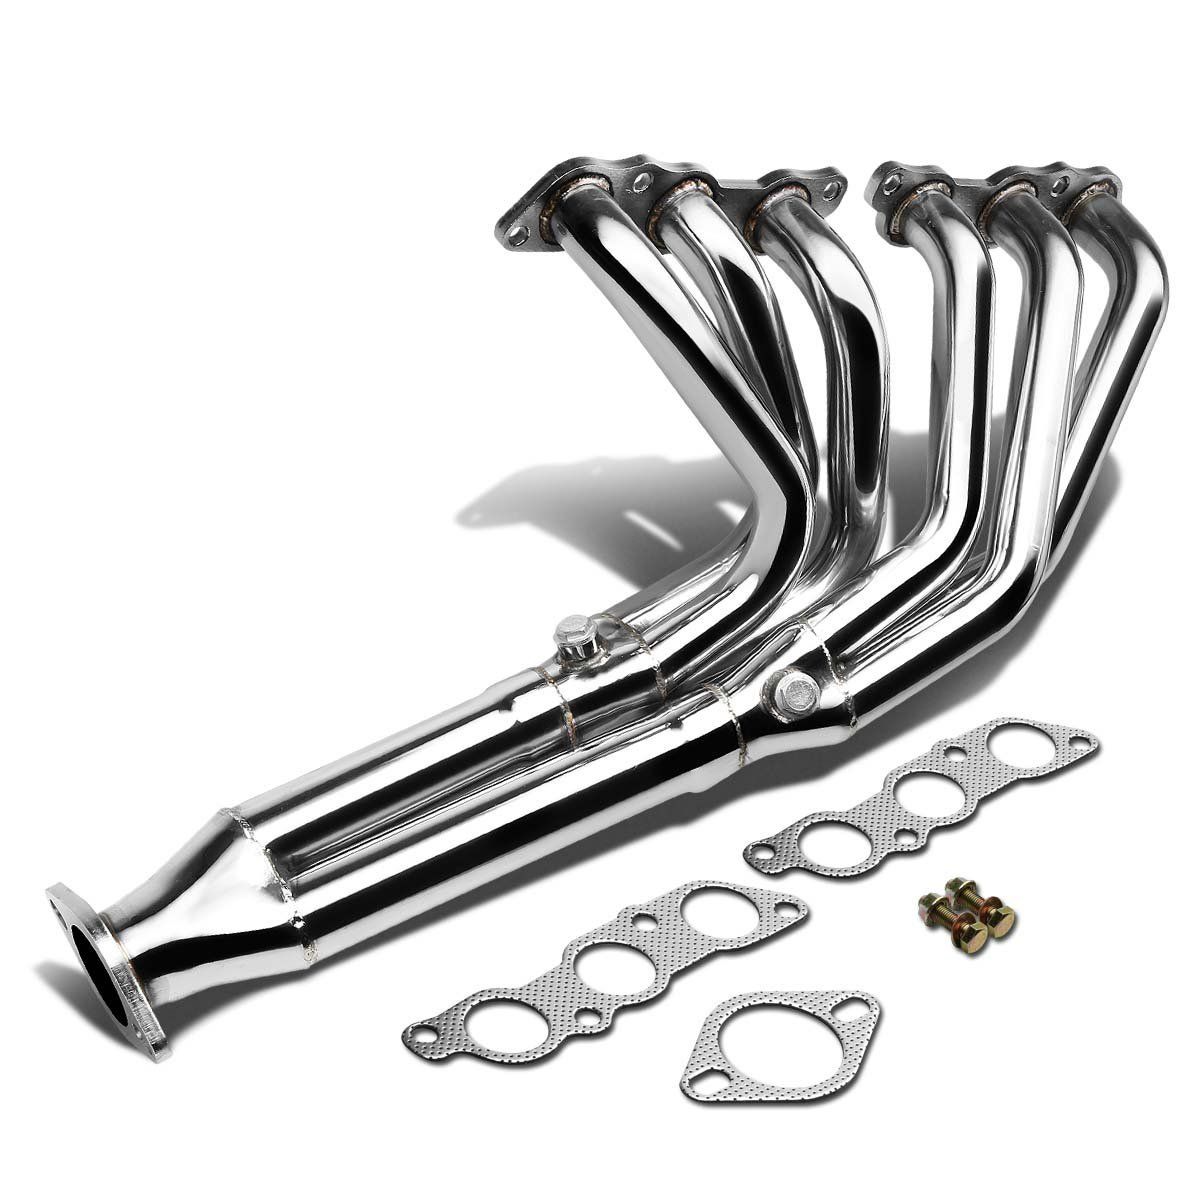 ODM Hose Barb Fittings Factories –  Stainless Racing Header Manifold Exhaust header Fits For 93-98 Toyota Supra MK4 NA 3.0L – Yibai